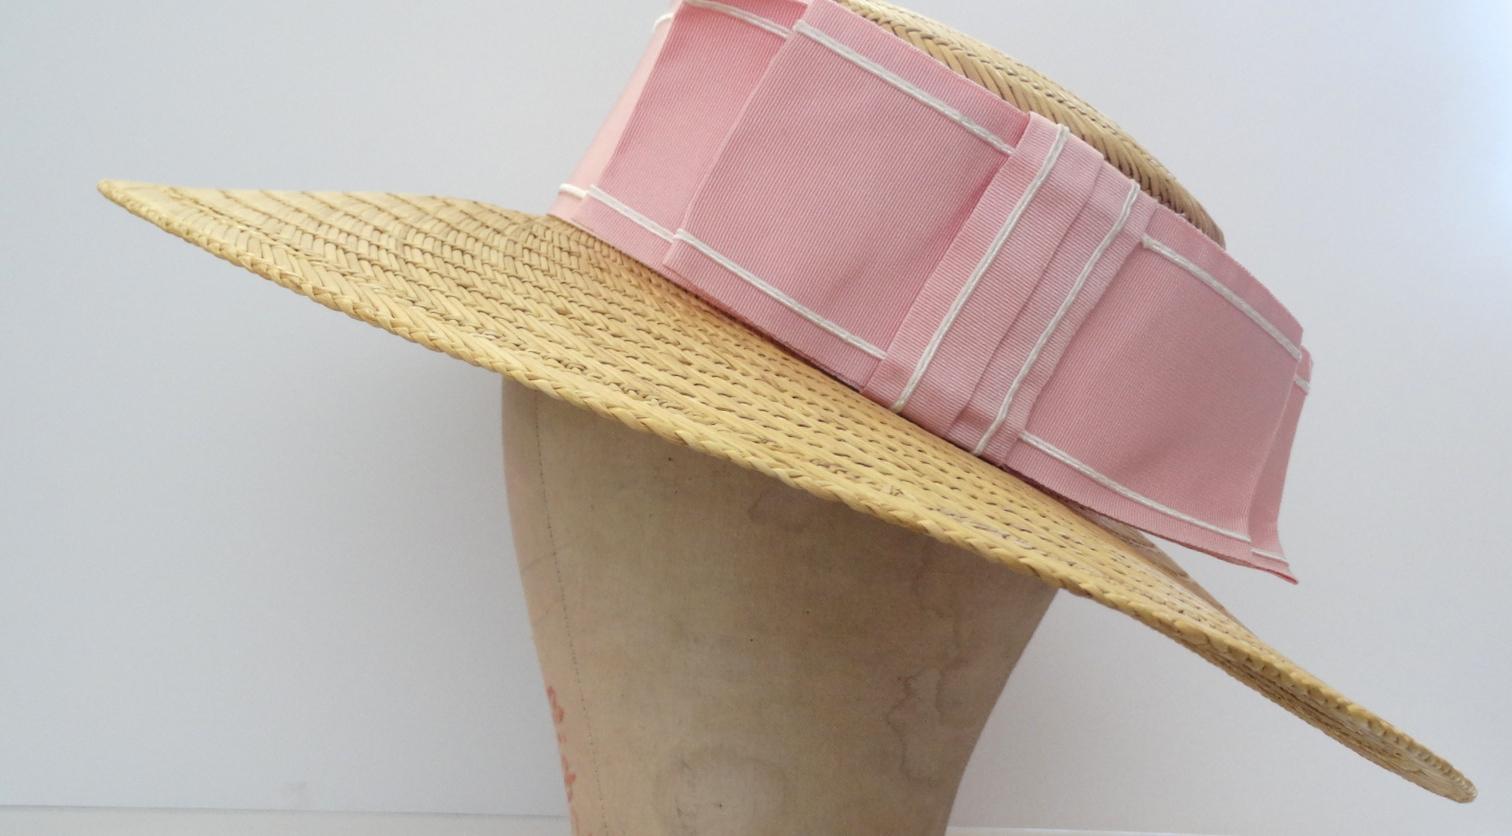 The perfect straw boater to add to your resort-wear wardrobe! Circa 1960s- boasts a large pink grosgrain ribbon bow around the base of the hat. Crafted from a classic yellow woven straw. Pairs perfectly with all your favorite sun dresses or at the